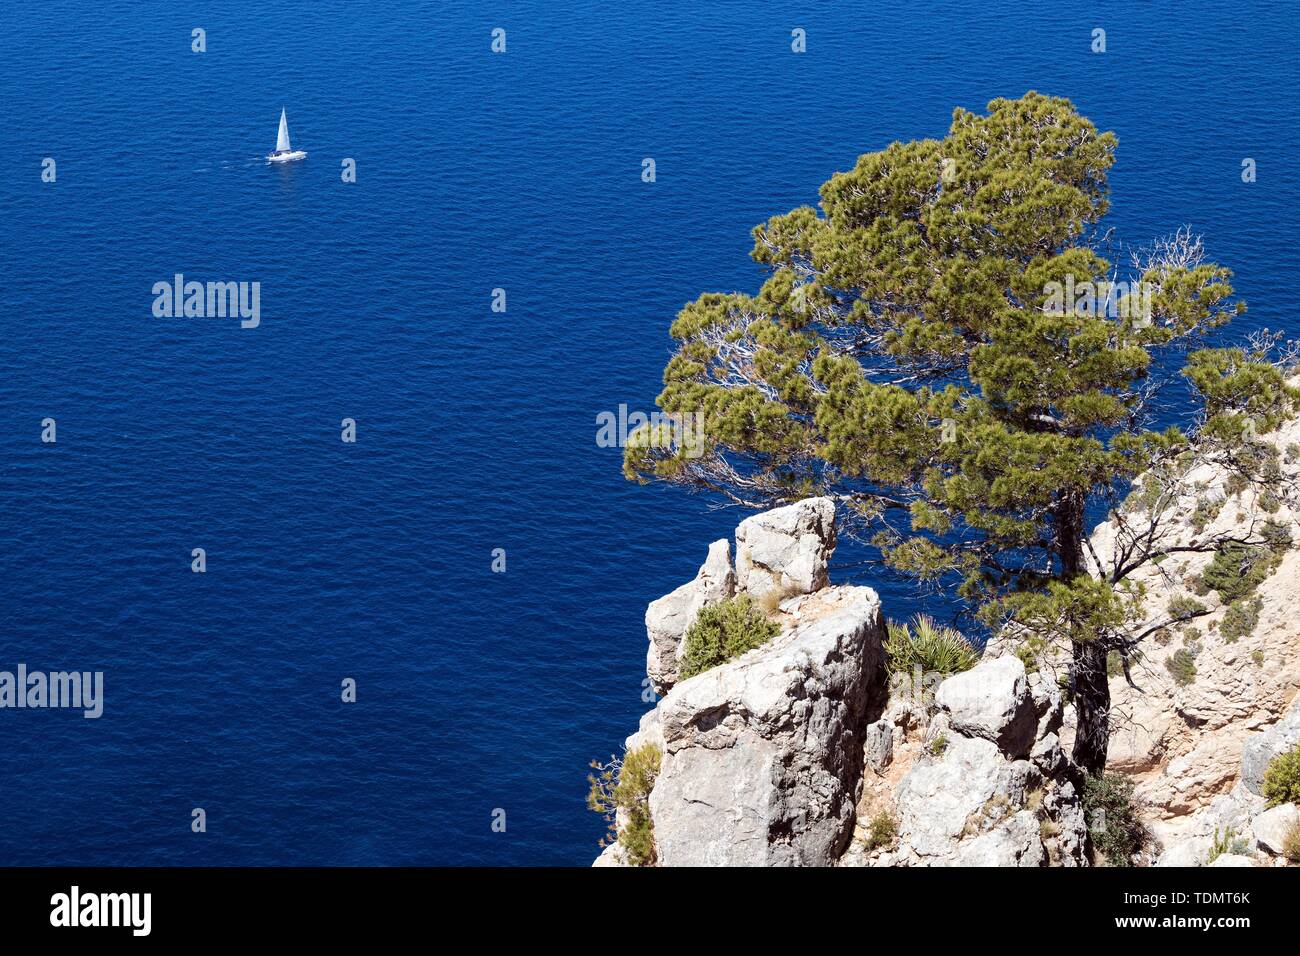 Aleppo Pine (Pinus halepensis) grows on a rock in front of blue sea, behind a sailboat, near Sant Elm, Majorca, Balearic Islands, Spain Stock Photo